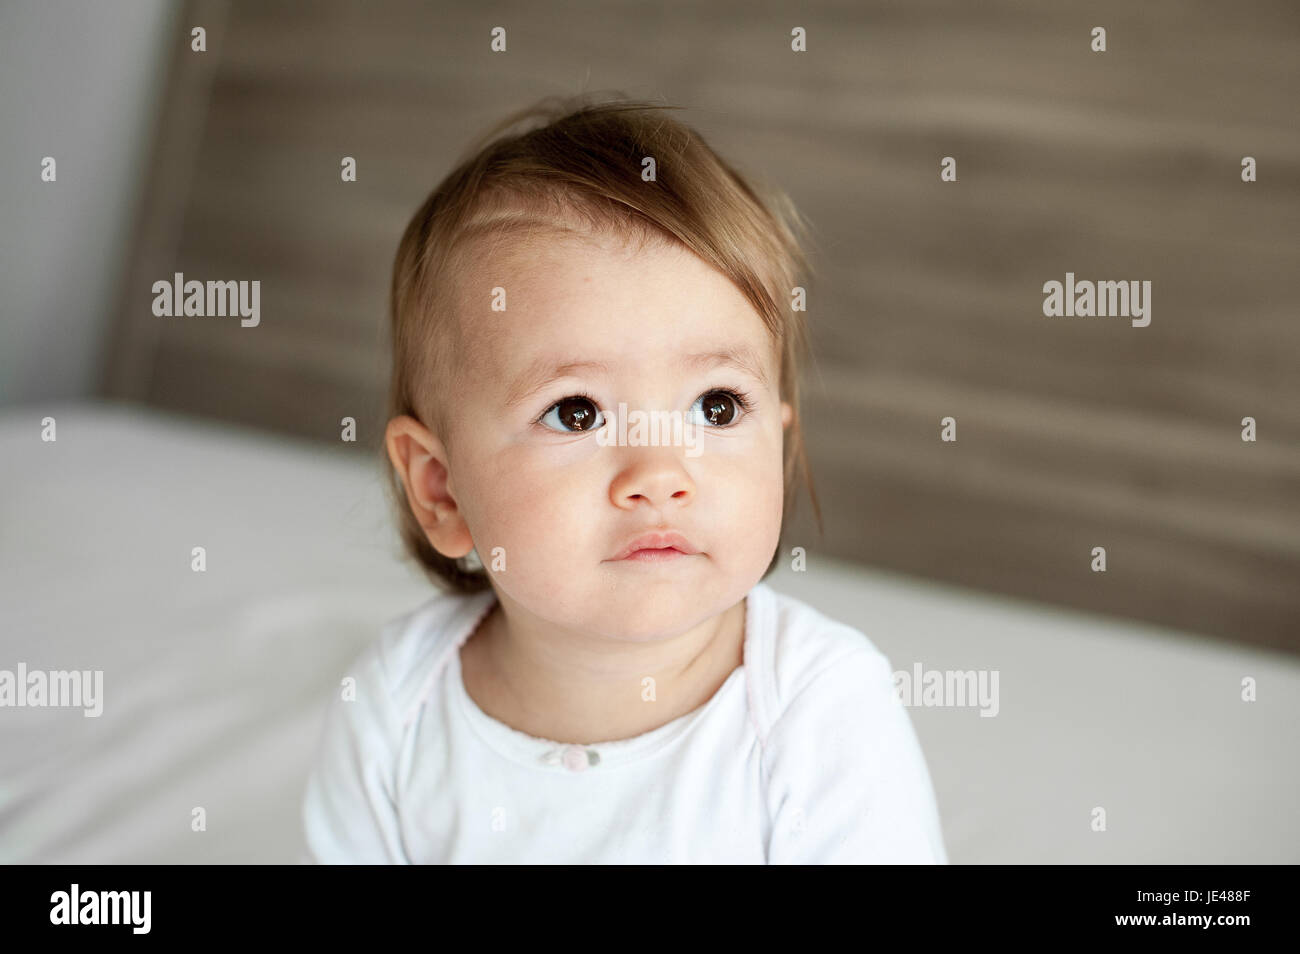 Friendly one year old baby feeling reflective Stock Photo